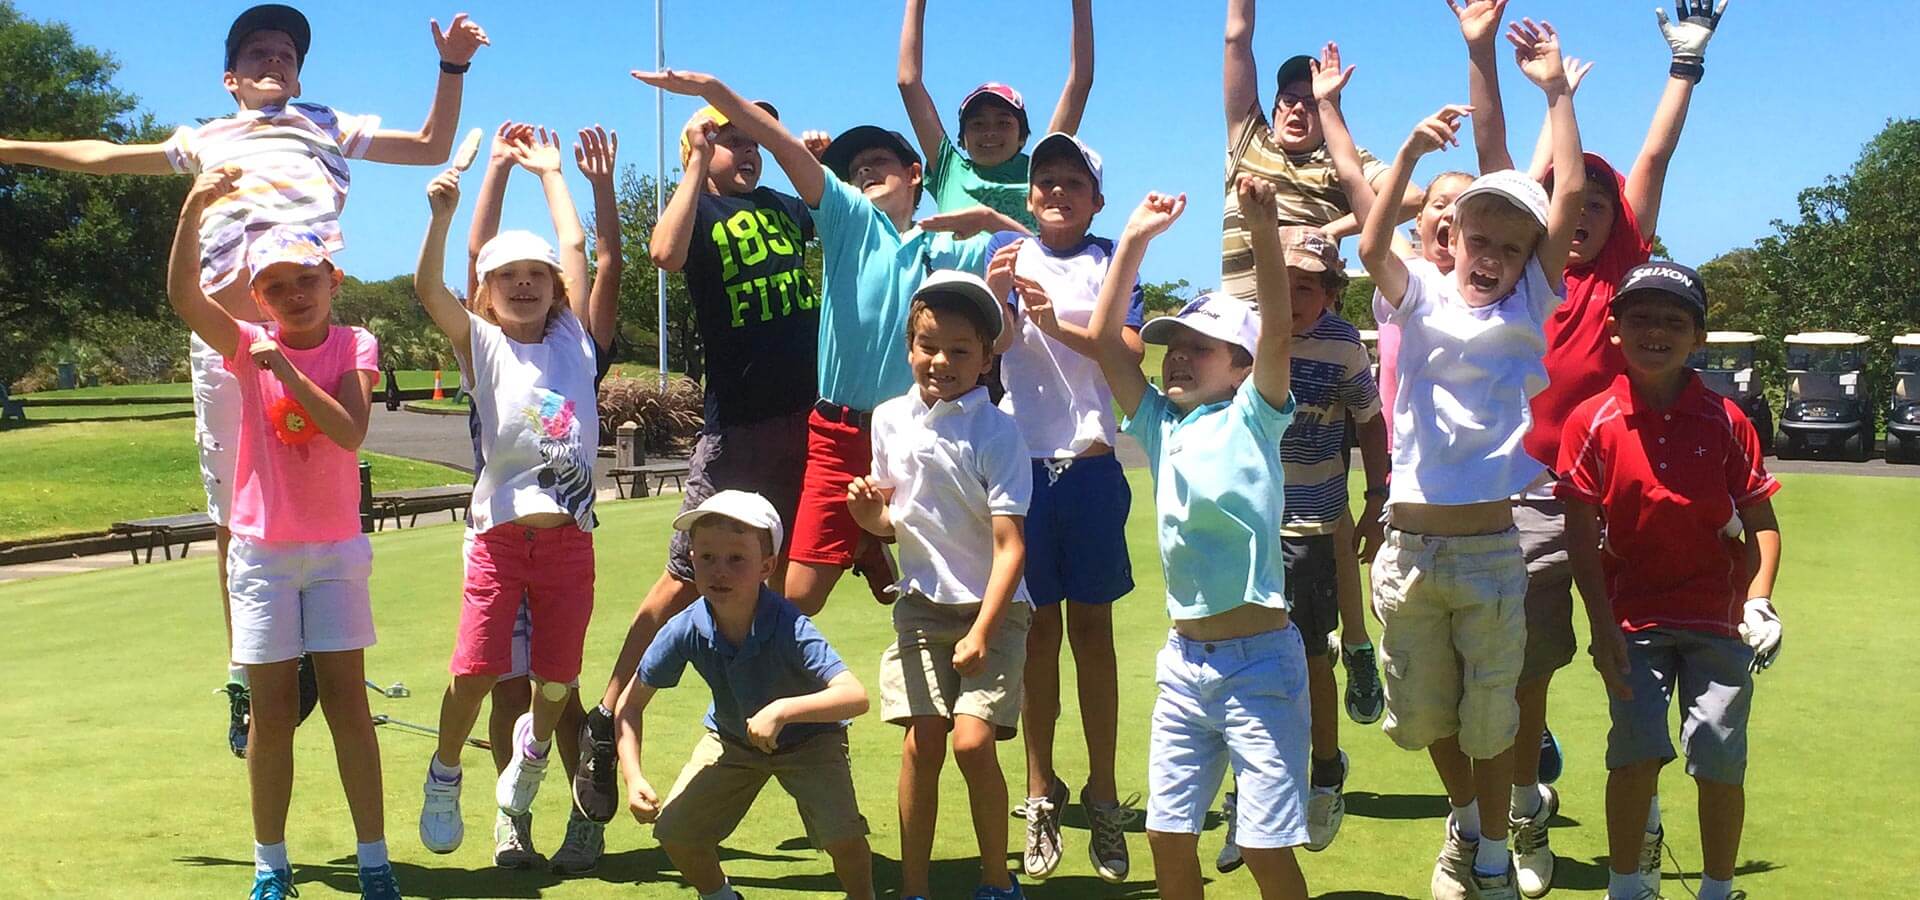 Kids jumping with fun for golf